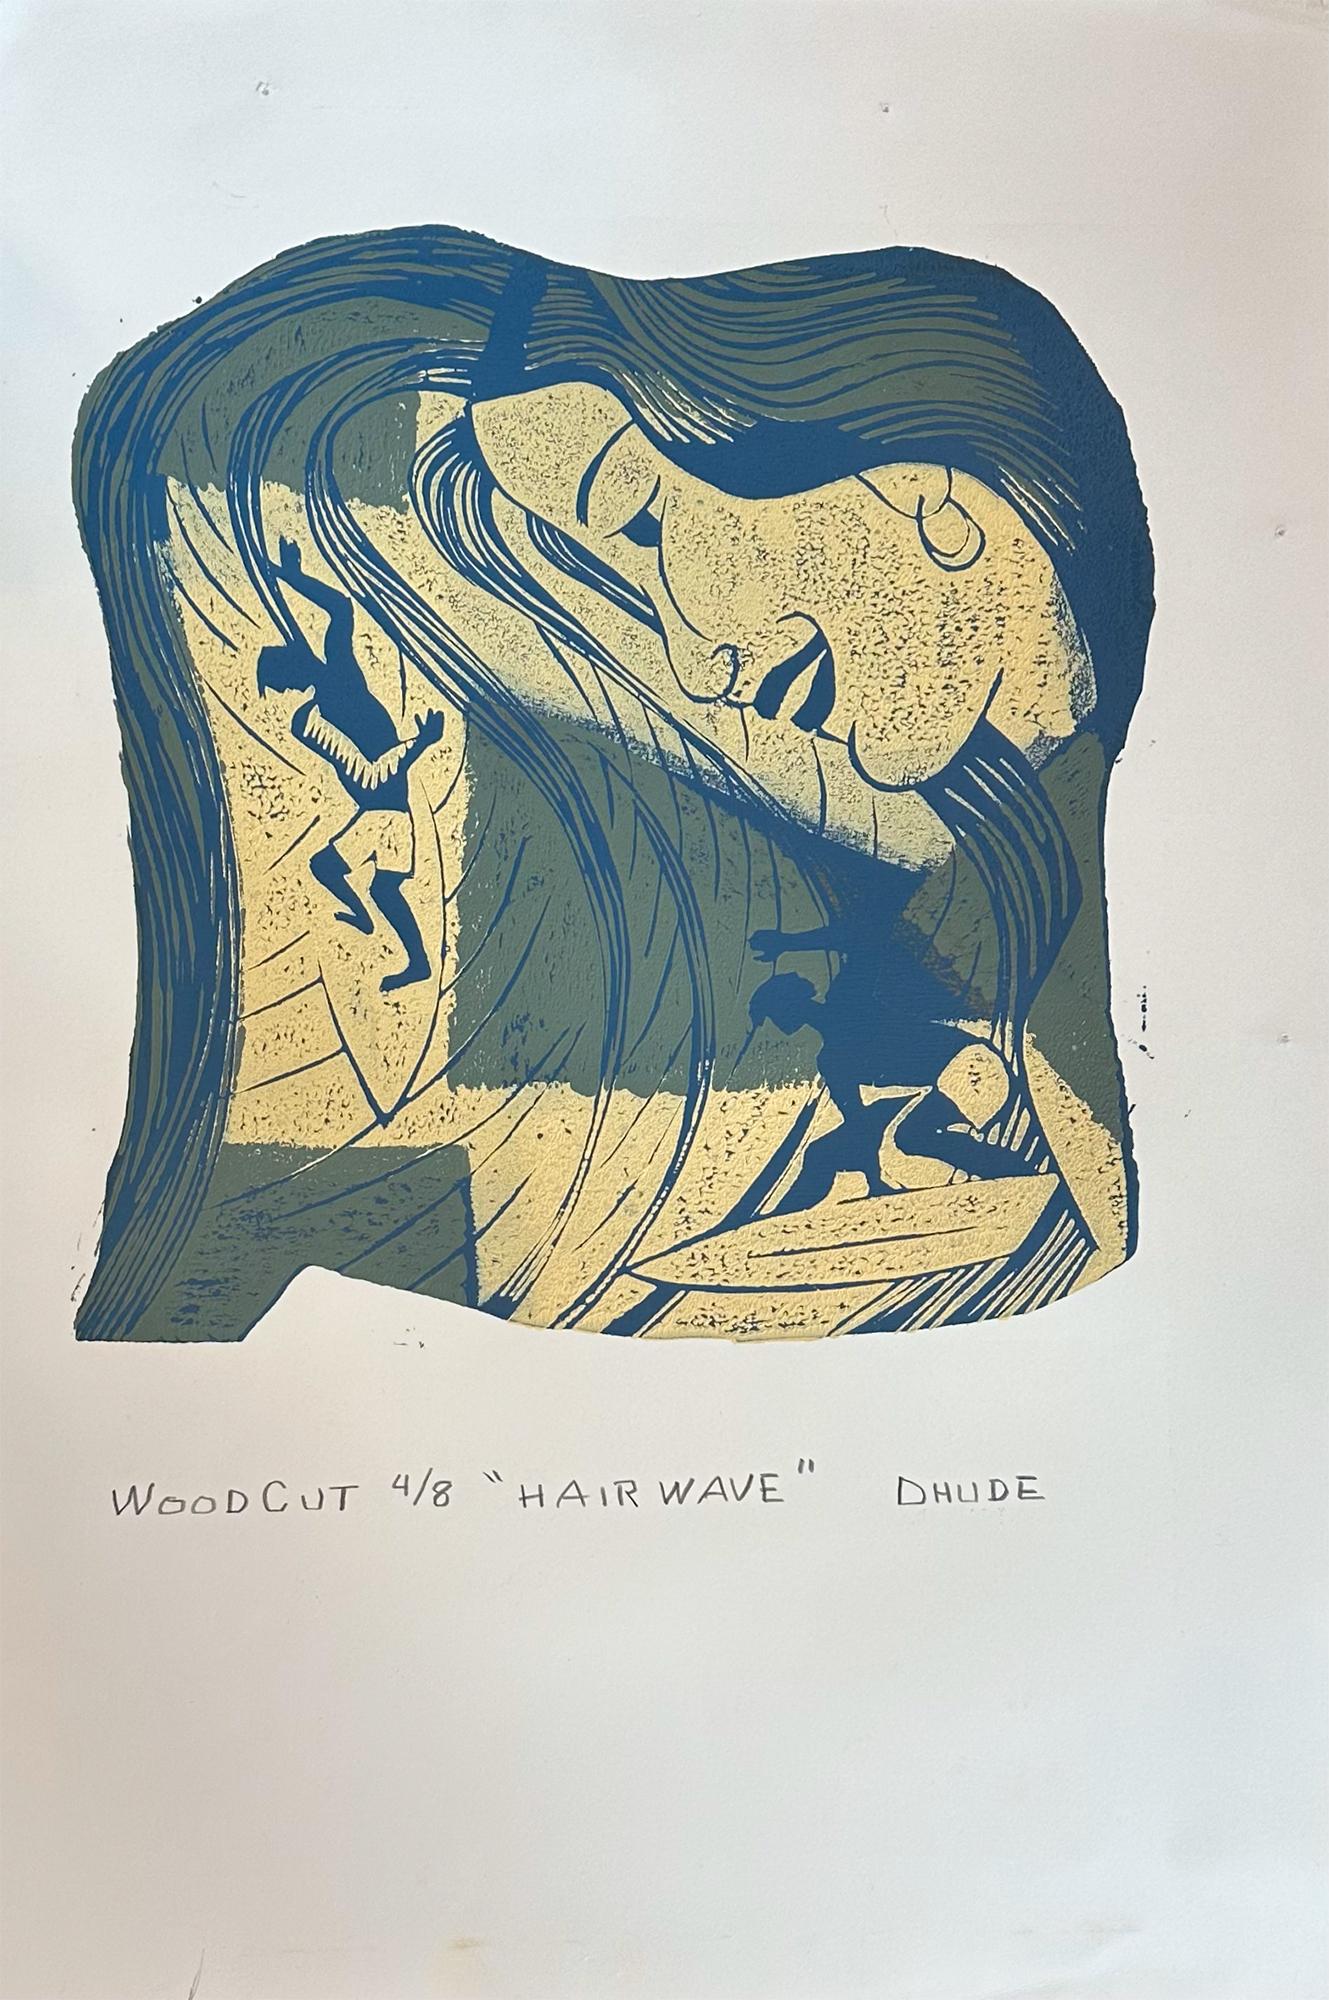 Hair Wave - Surfing Art - Figurative - Woodcut Print By Marc Zimmerman

Limited Edition 01/04

This masterwork is exhibited in the Zimmerman Gallery, Carmel CA.

Immerse yourself in the captivating world of surfing and ocean vibes with Marc